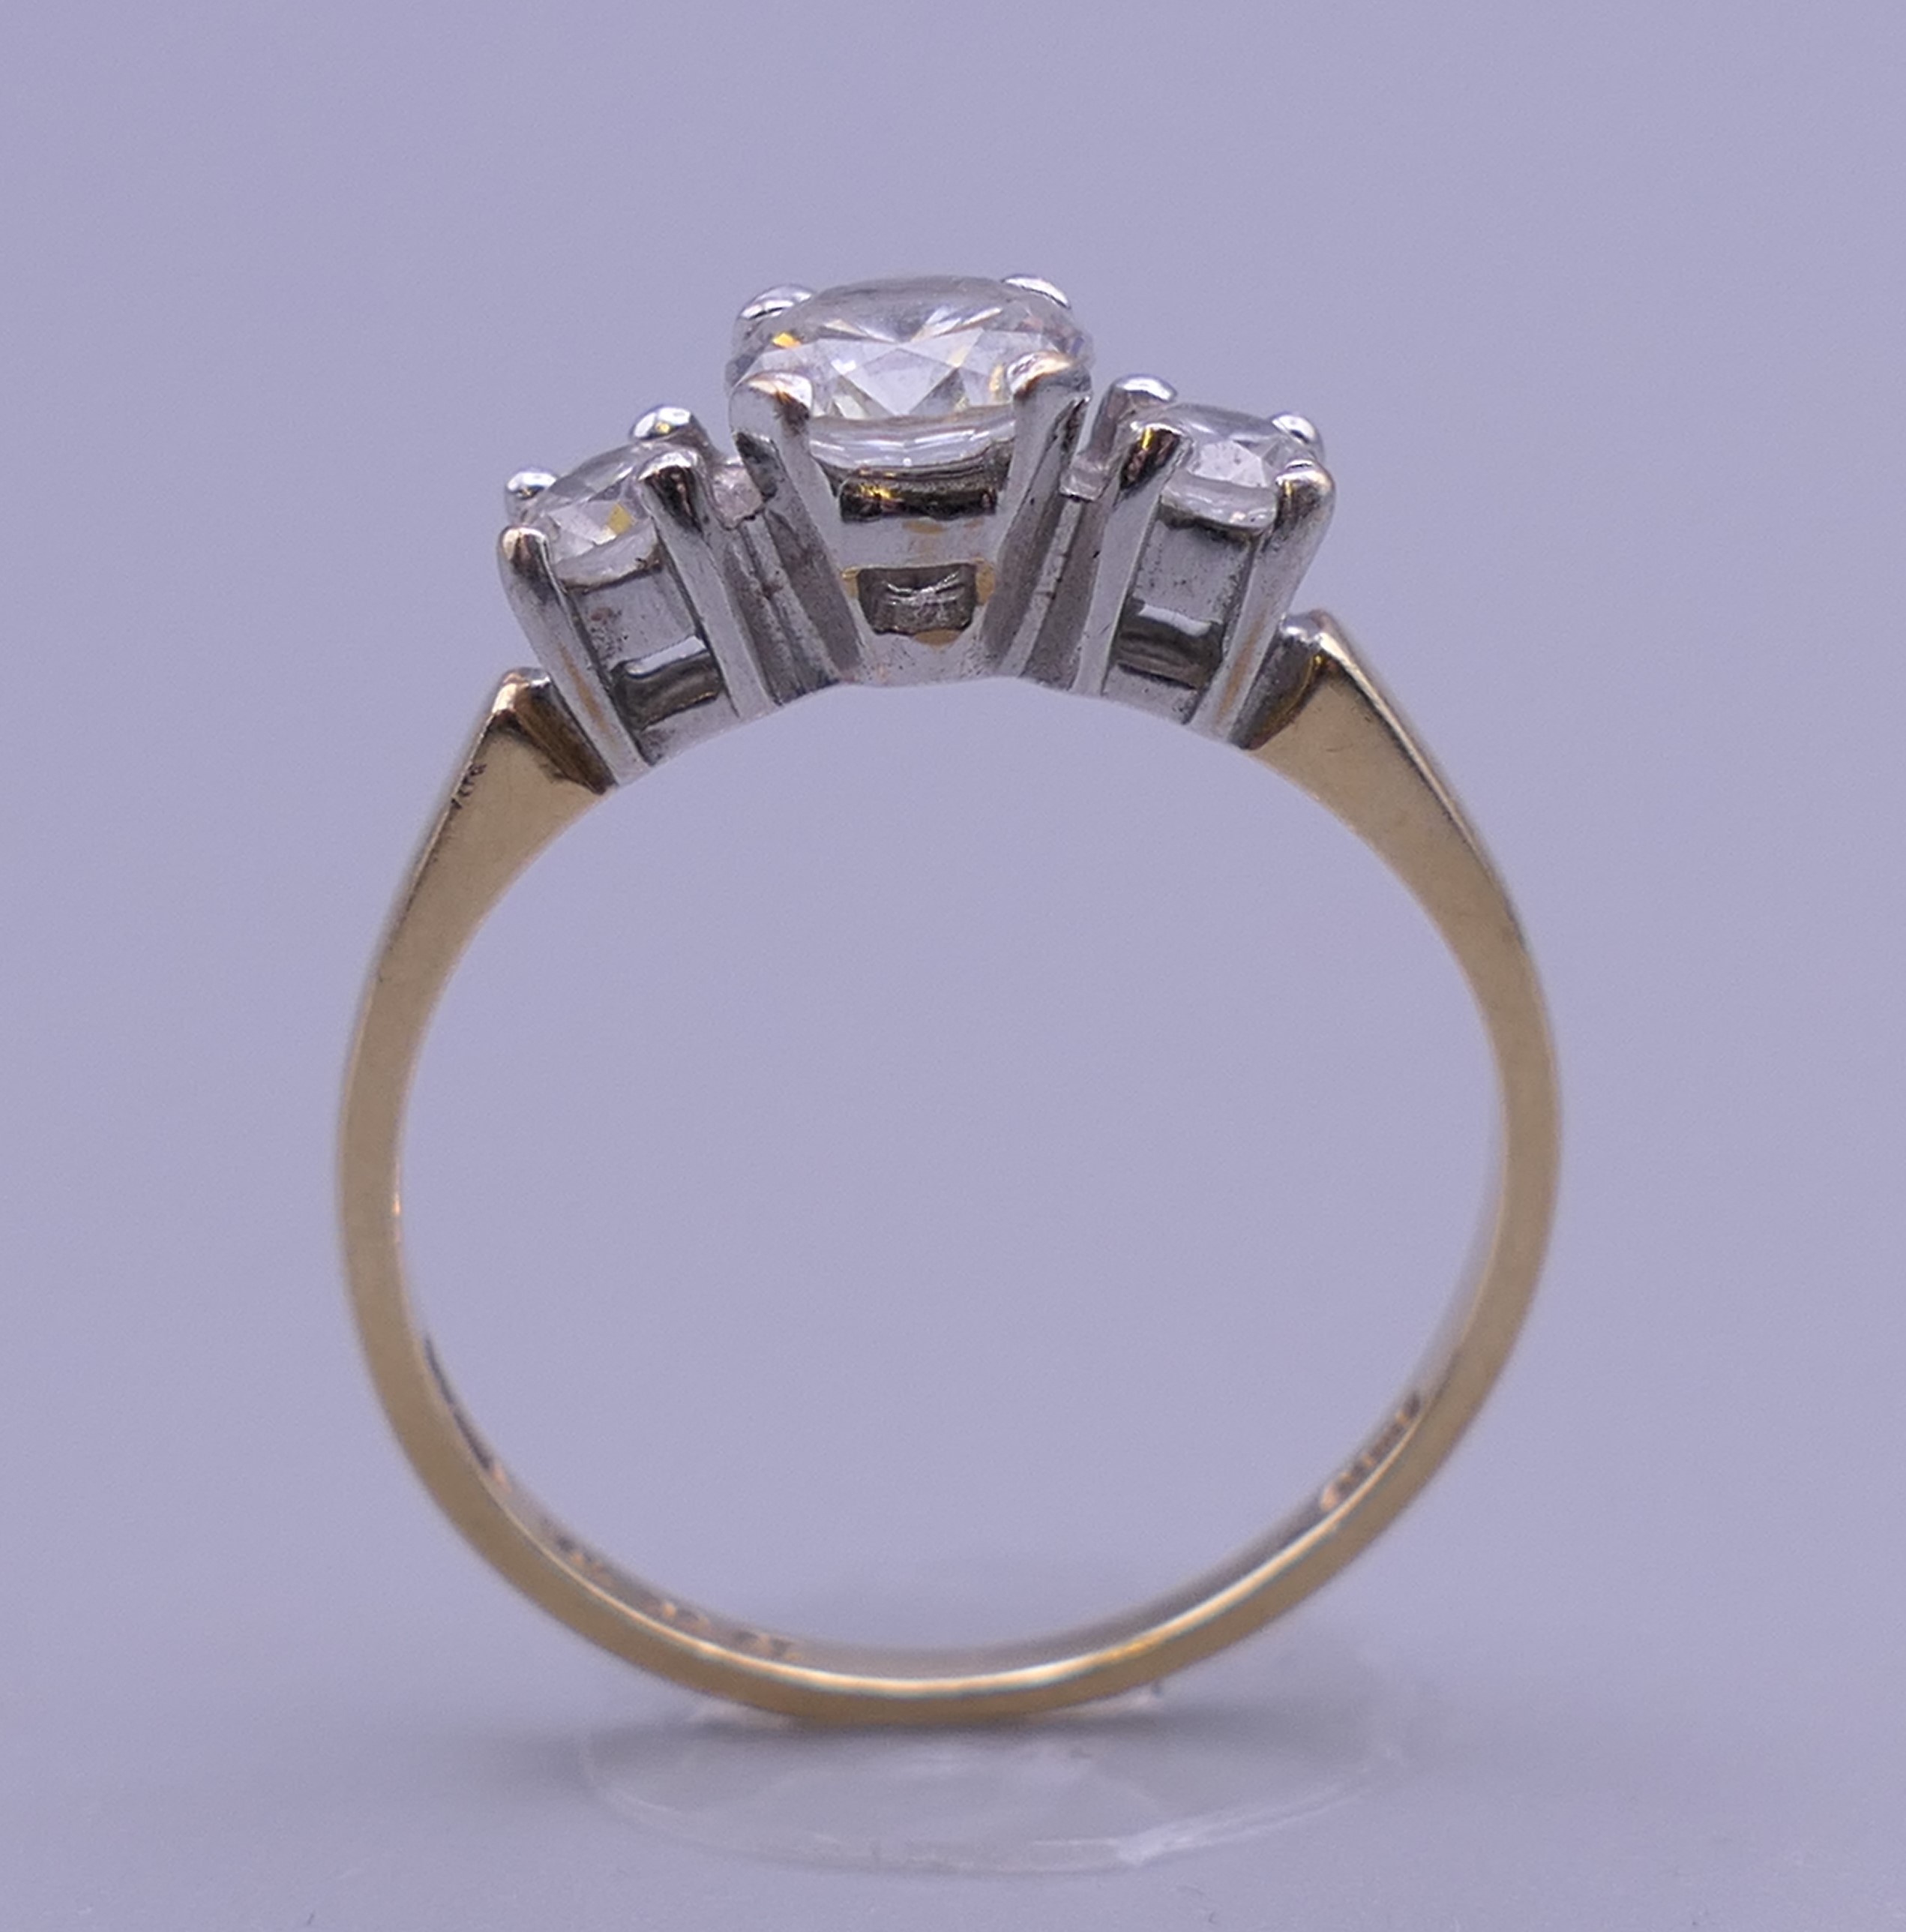 A 14 ct gold cubic zirconia ring. Ring size M. 2.5 grammes total weight. - Image 3 of 8